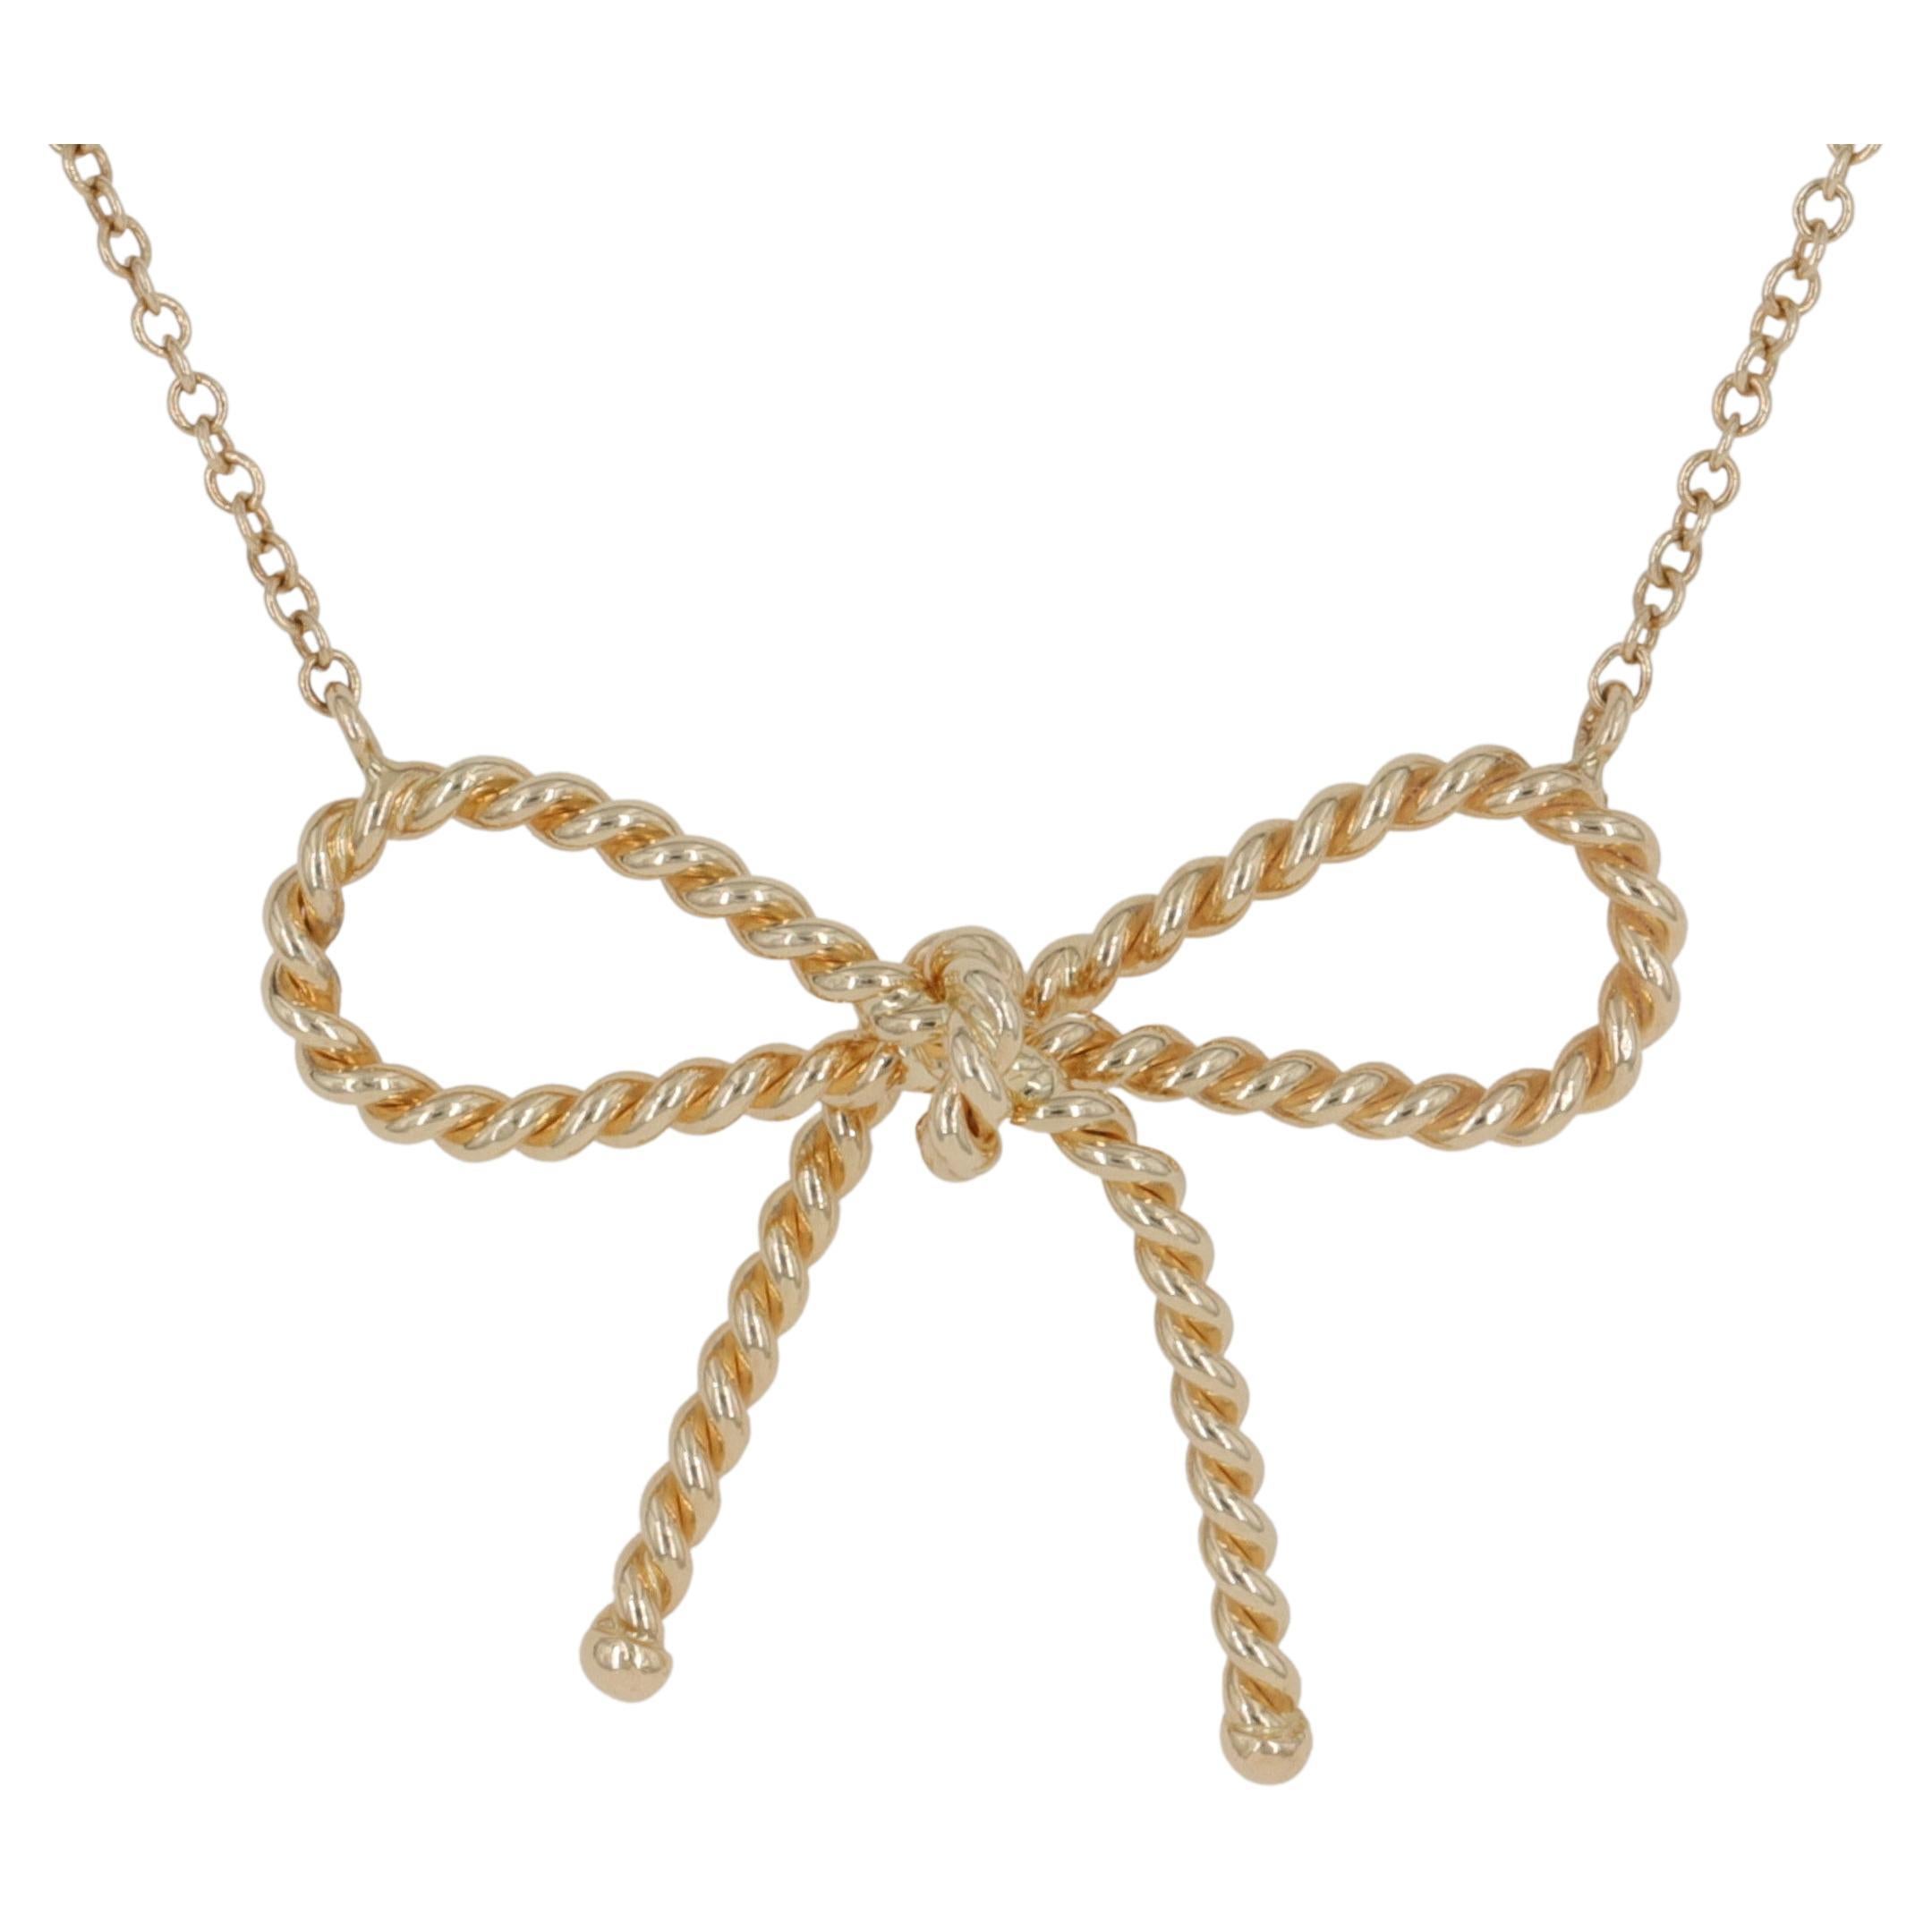 Tiffany & Co. Rope Bow Pendant Necklace in 18 Karat Yellow Gold 